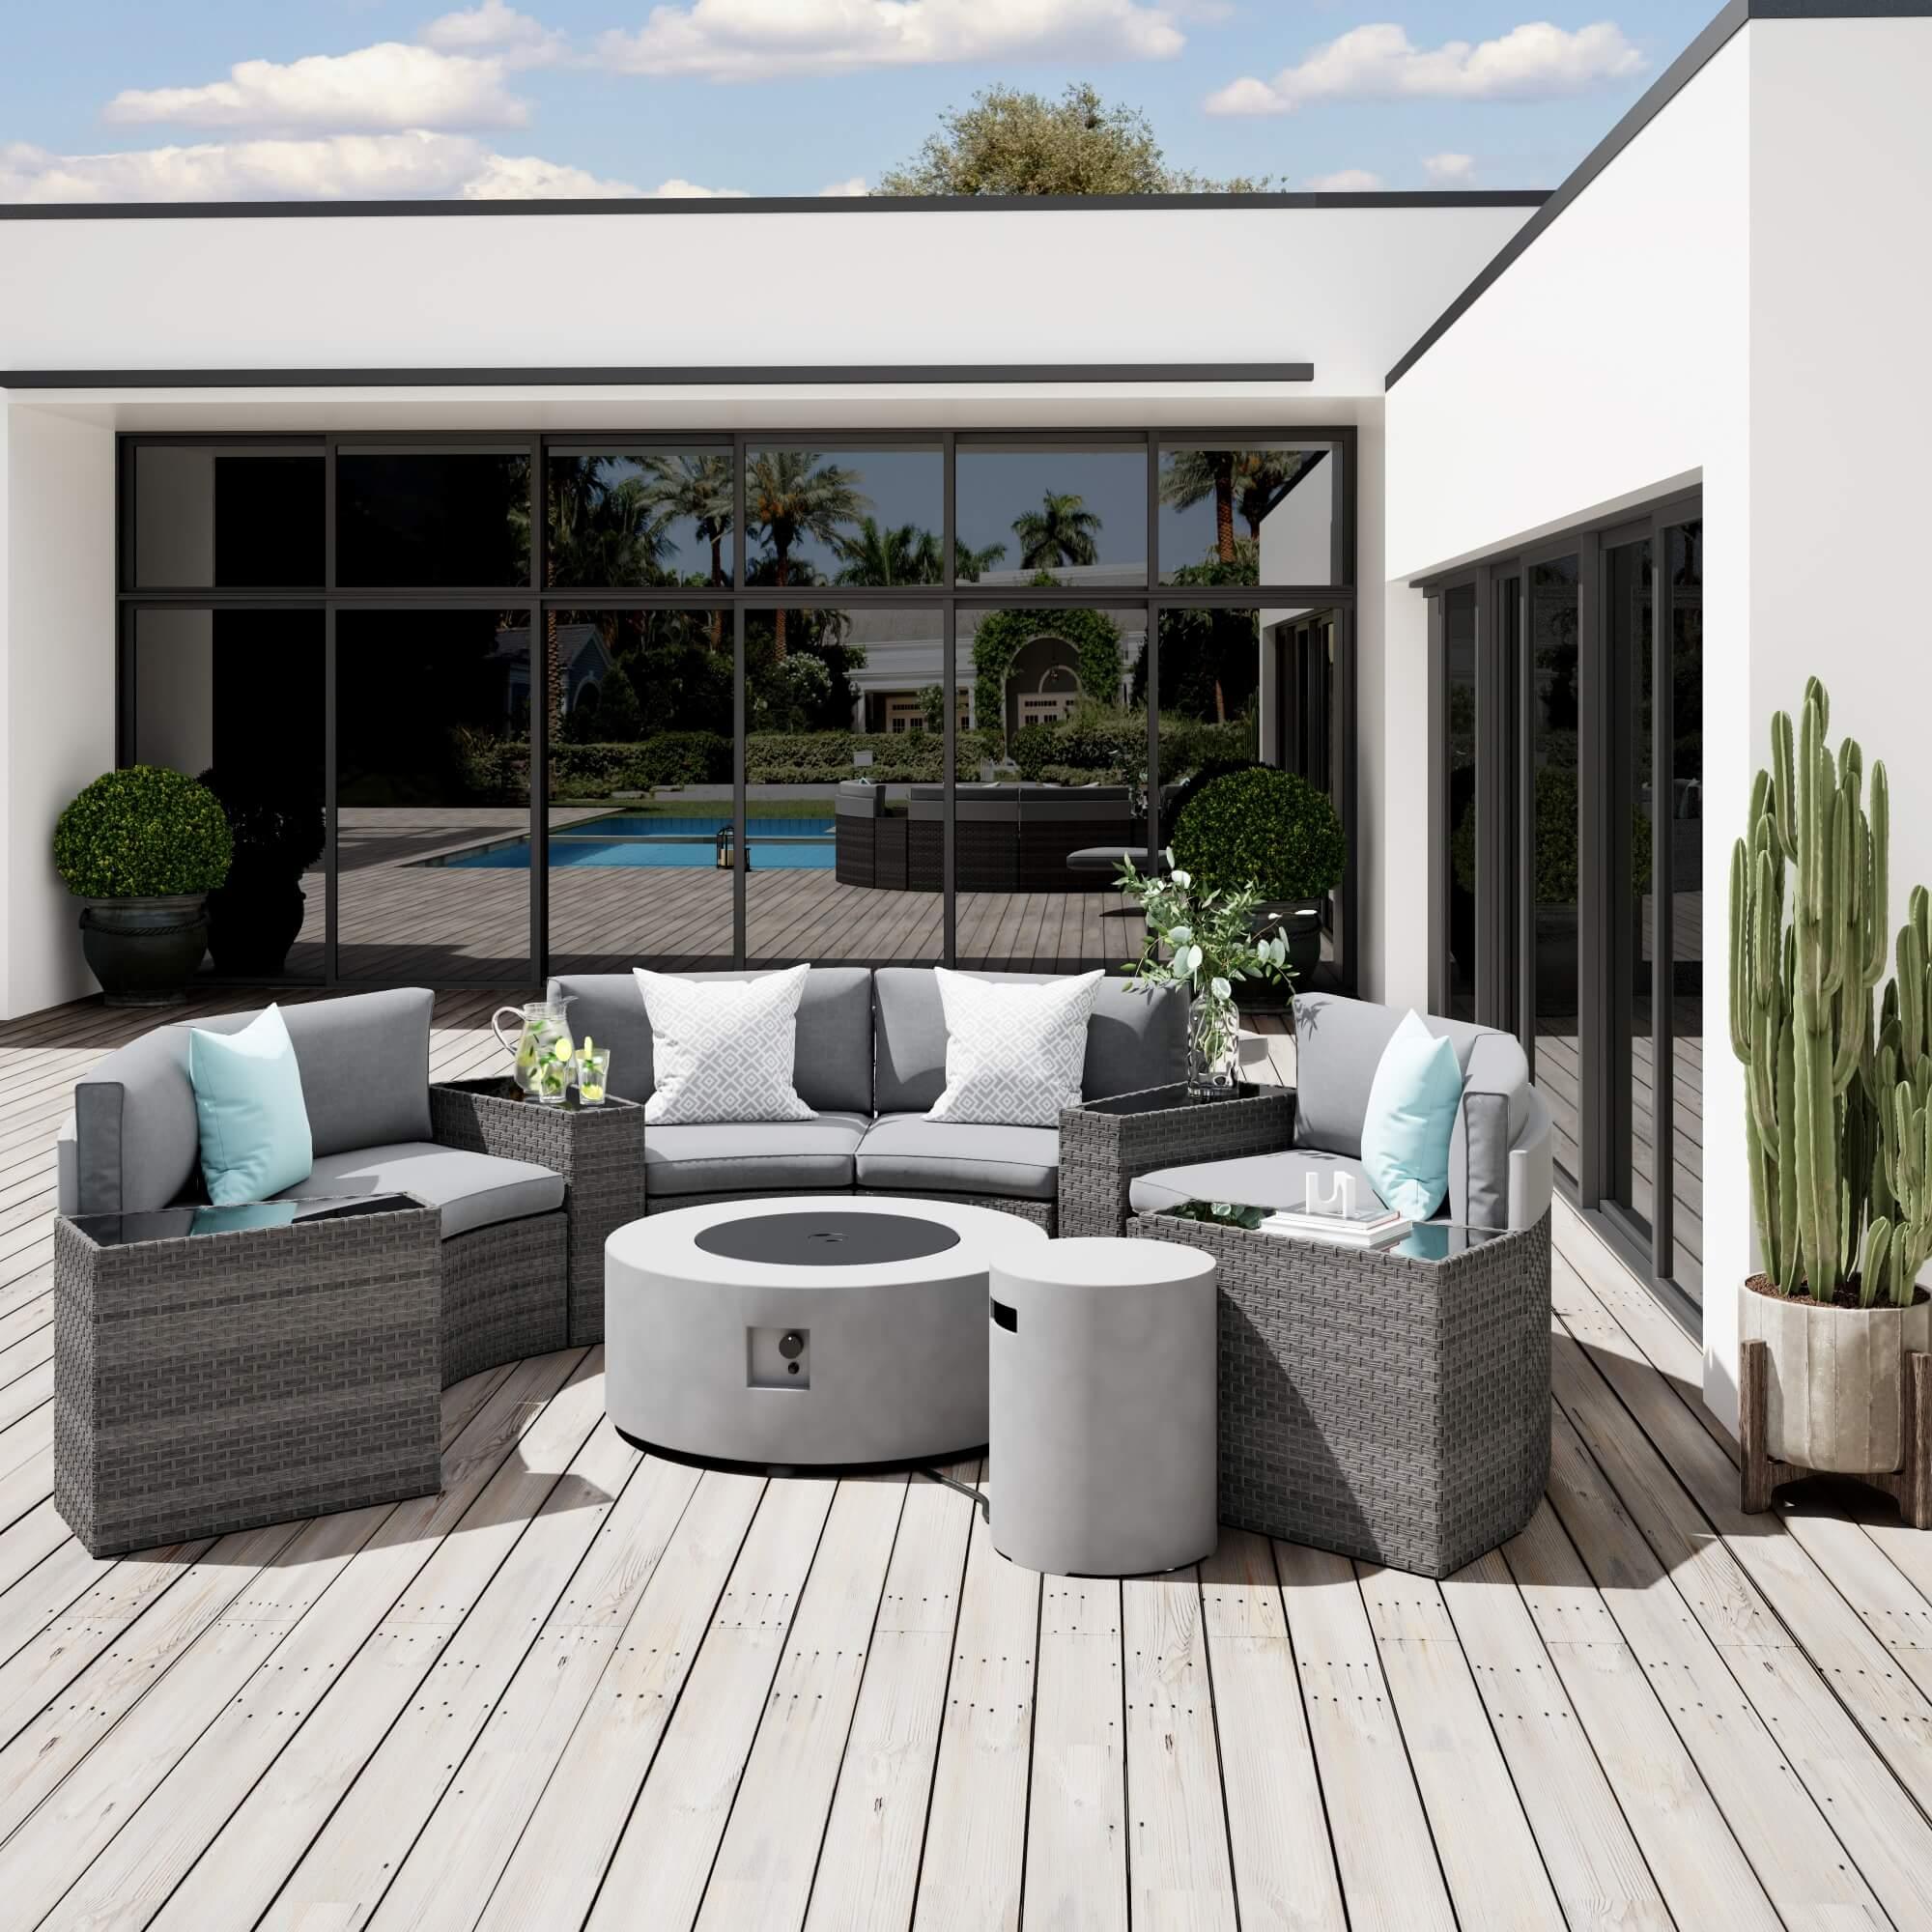 Boboli Modern Wicker Outdoor Furniture, 6-seater Grey Wicker Curved Sectional sofas with grey cushions, 4 side tables + 1 grey Propane Fire Pit with tank holder, on the yard - Jardina Furniture #color_Grey